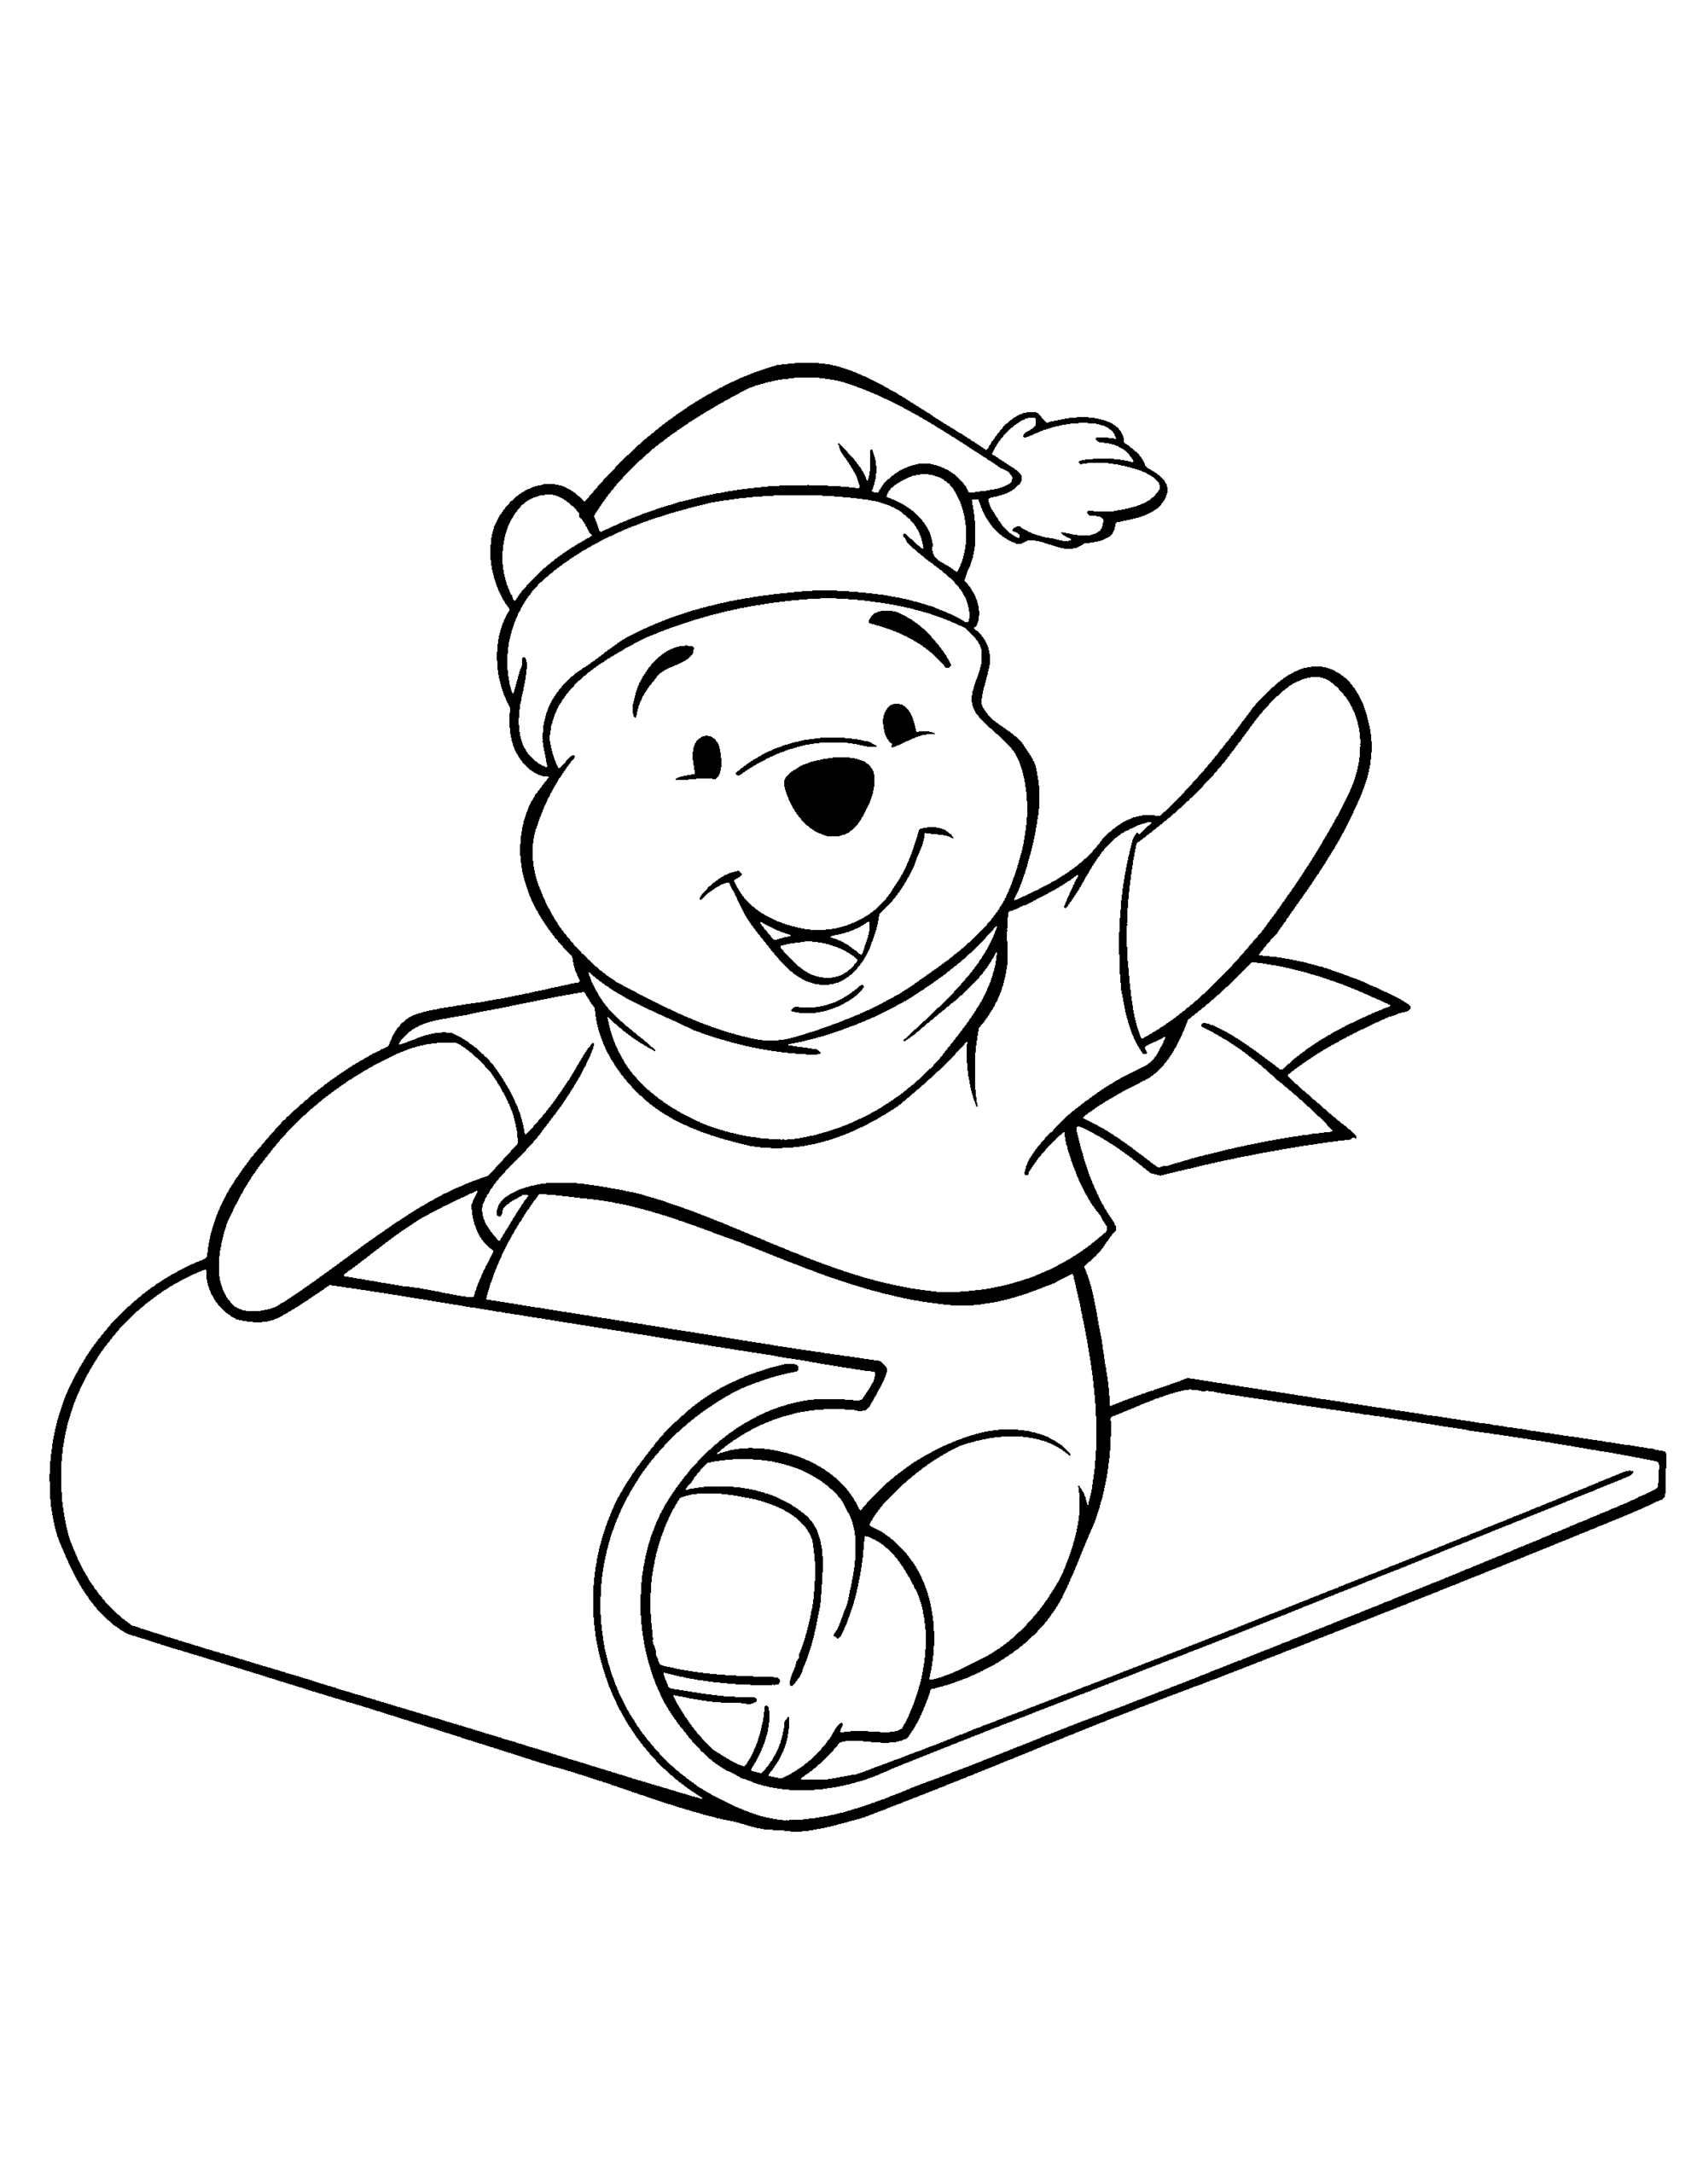 Winnie the Pooh Coloring Pages Cartoons winnie the pooh 92 Printable 2020 7215 Coloring4free